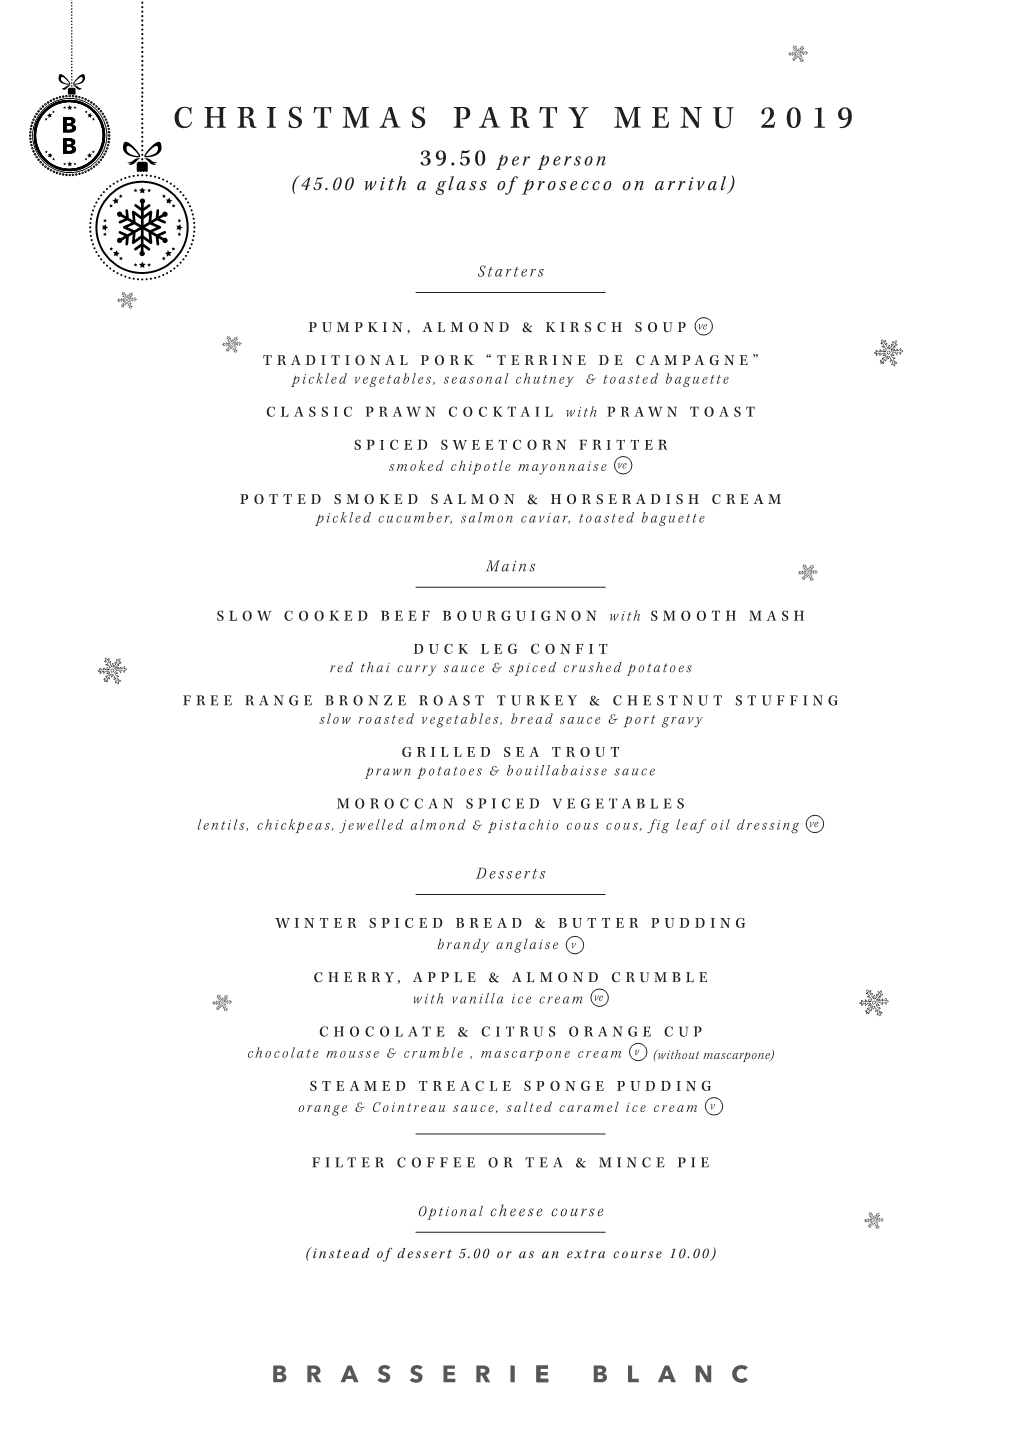 CHRISTMAS PARTY MENU 2019 39.50 Per Person (45.00 with a Glass of Prosecco on Arrival)